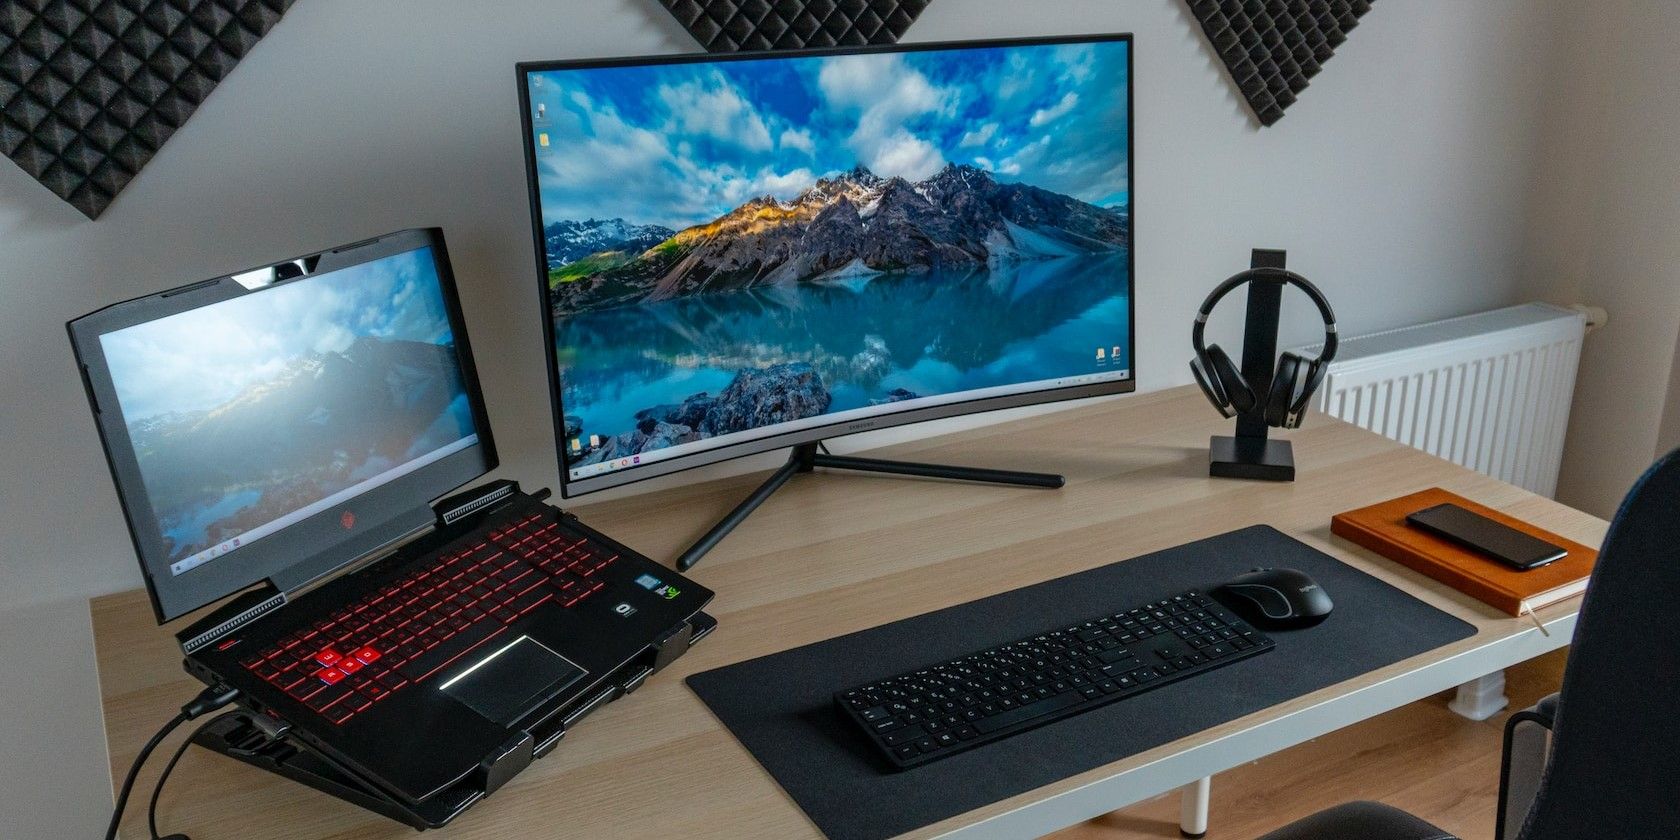 A black laptop and a monitor on a wooden table